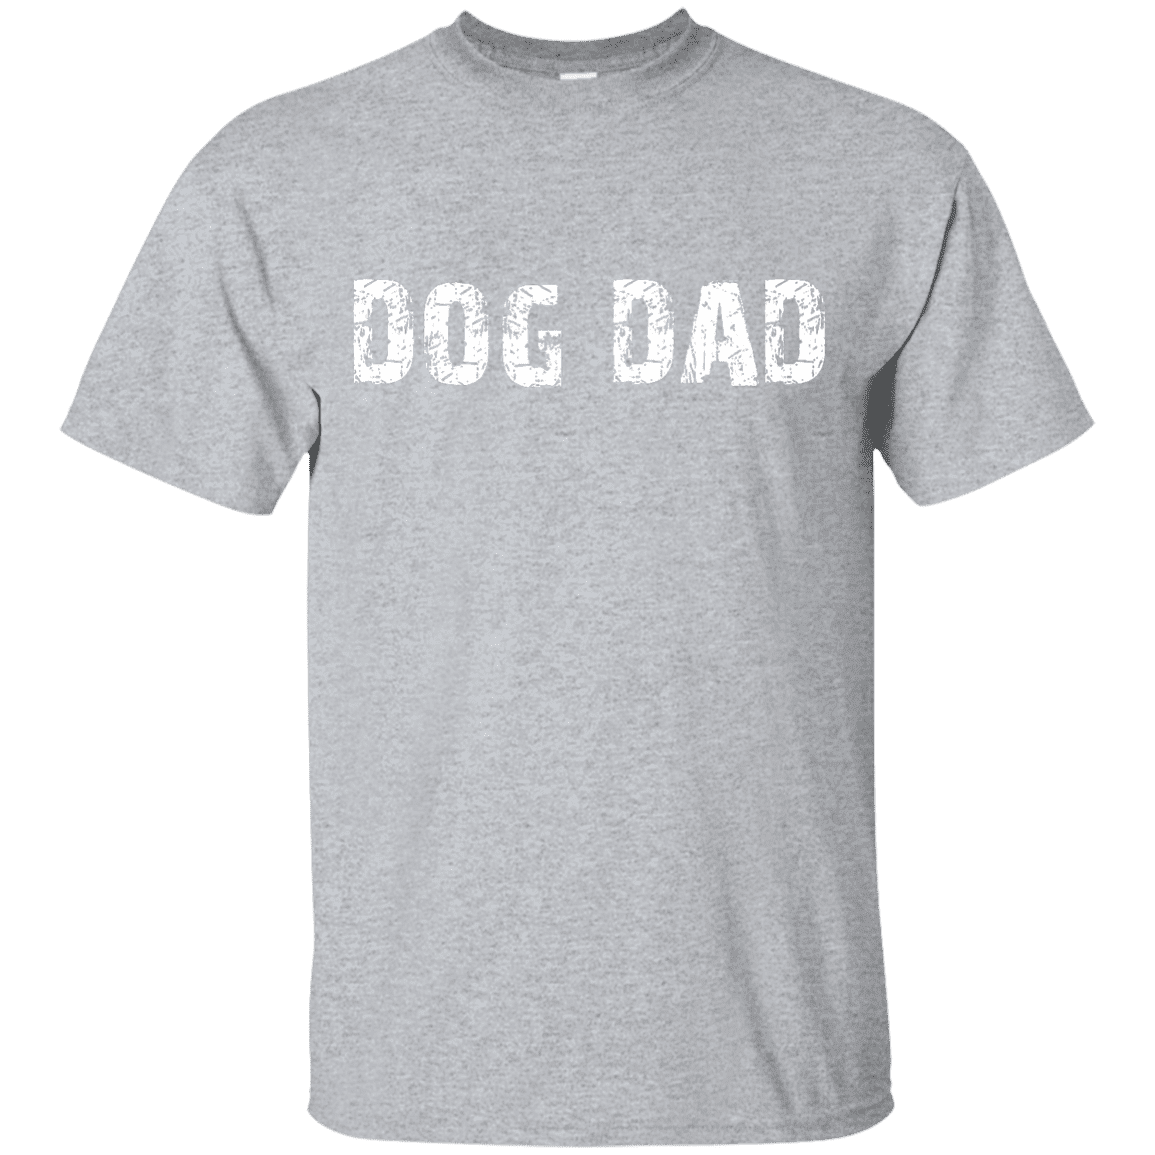 Bad*ss Dog Dad Rescuer - T Shirt.